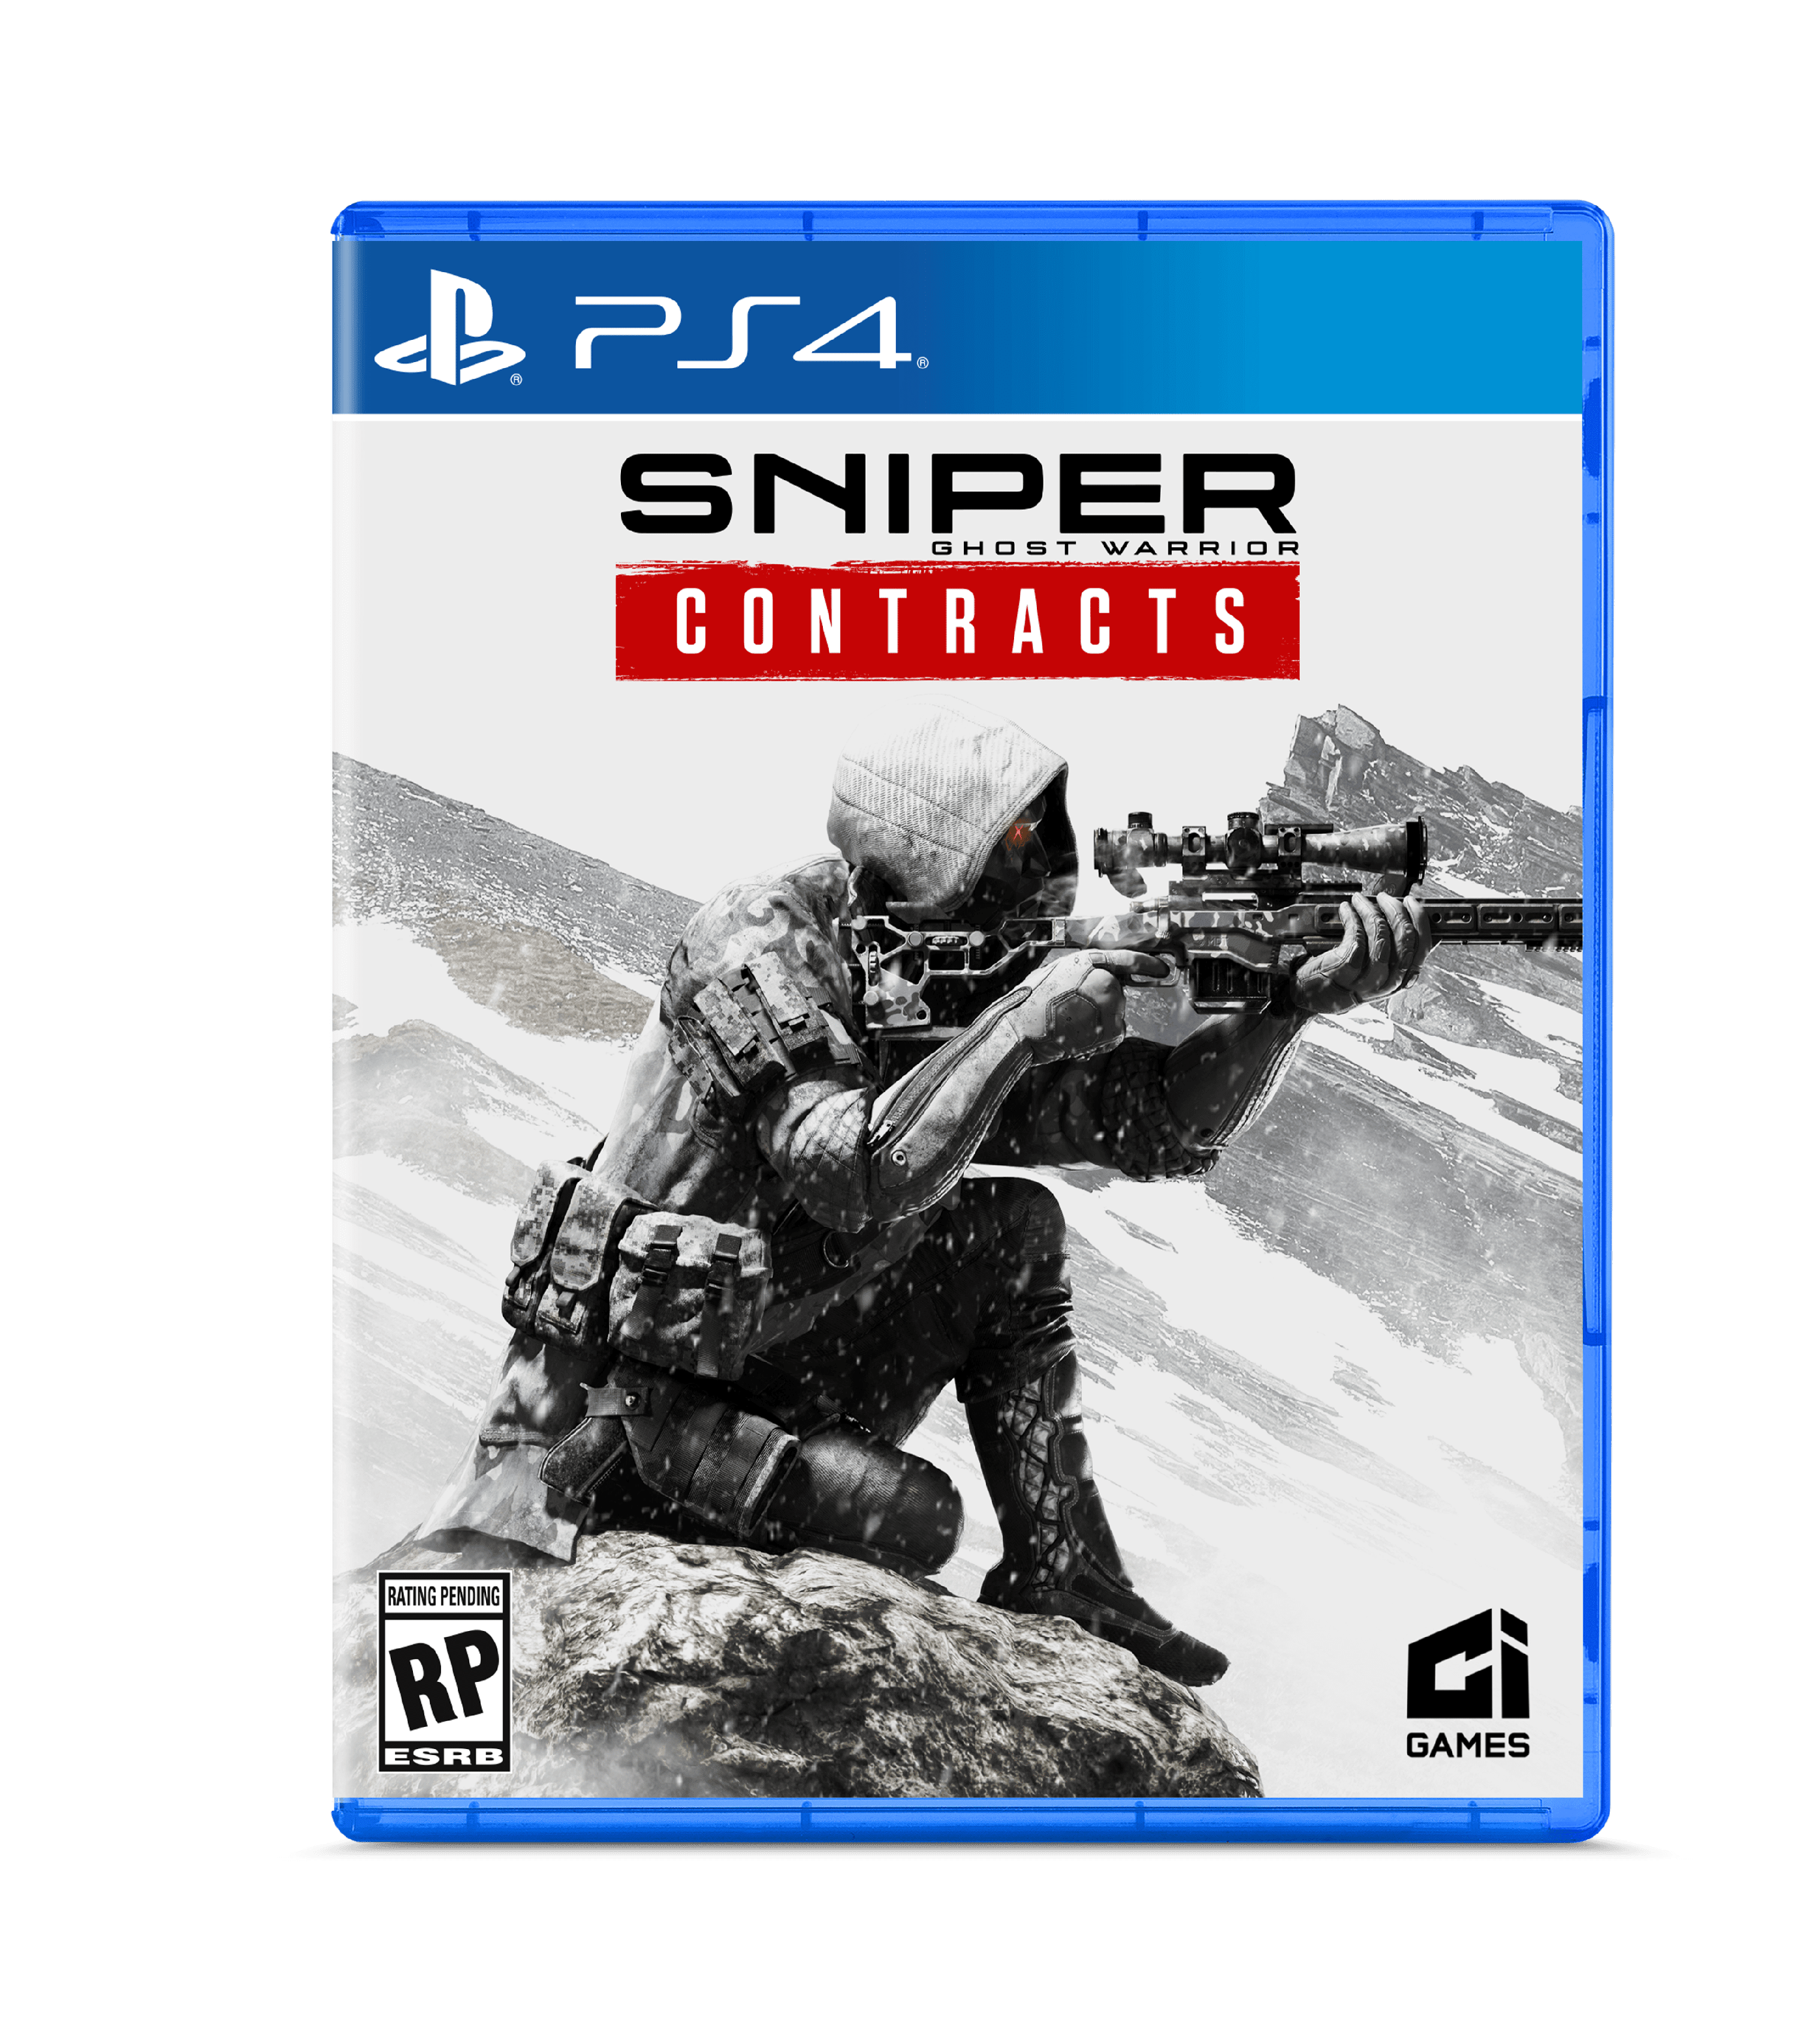 Sniper Ghost Warrior Contracts Ci Games Playstation 4 816293016211 Walmartcom - how to build a snipeing game on roblox